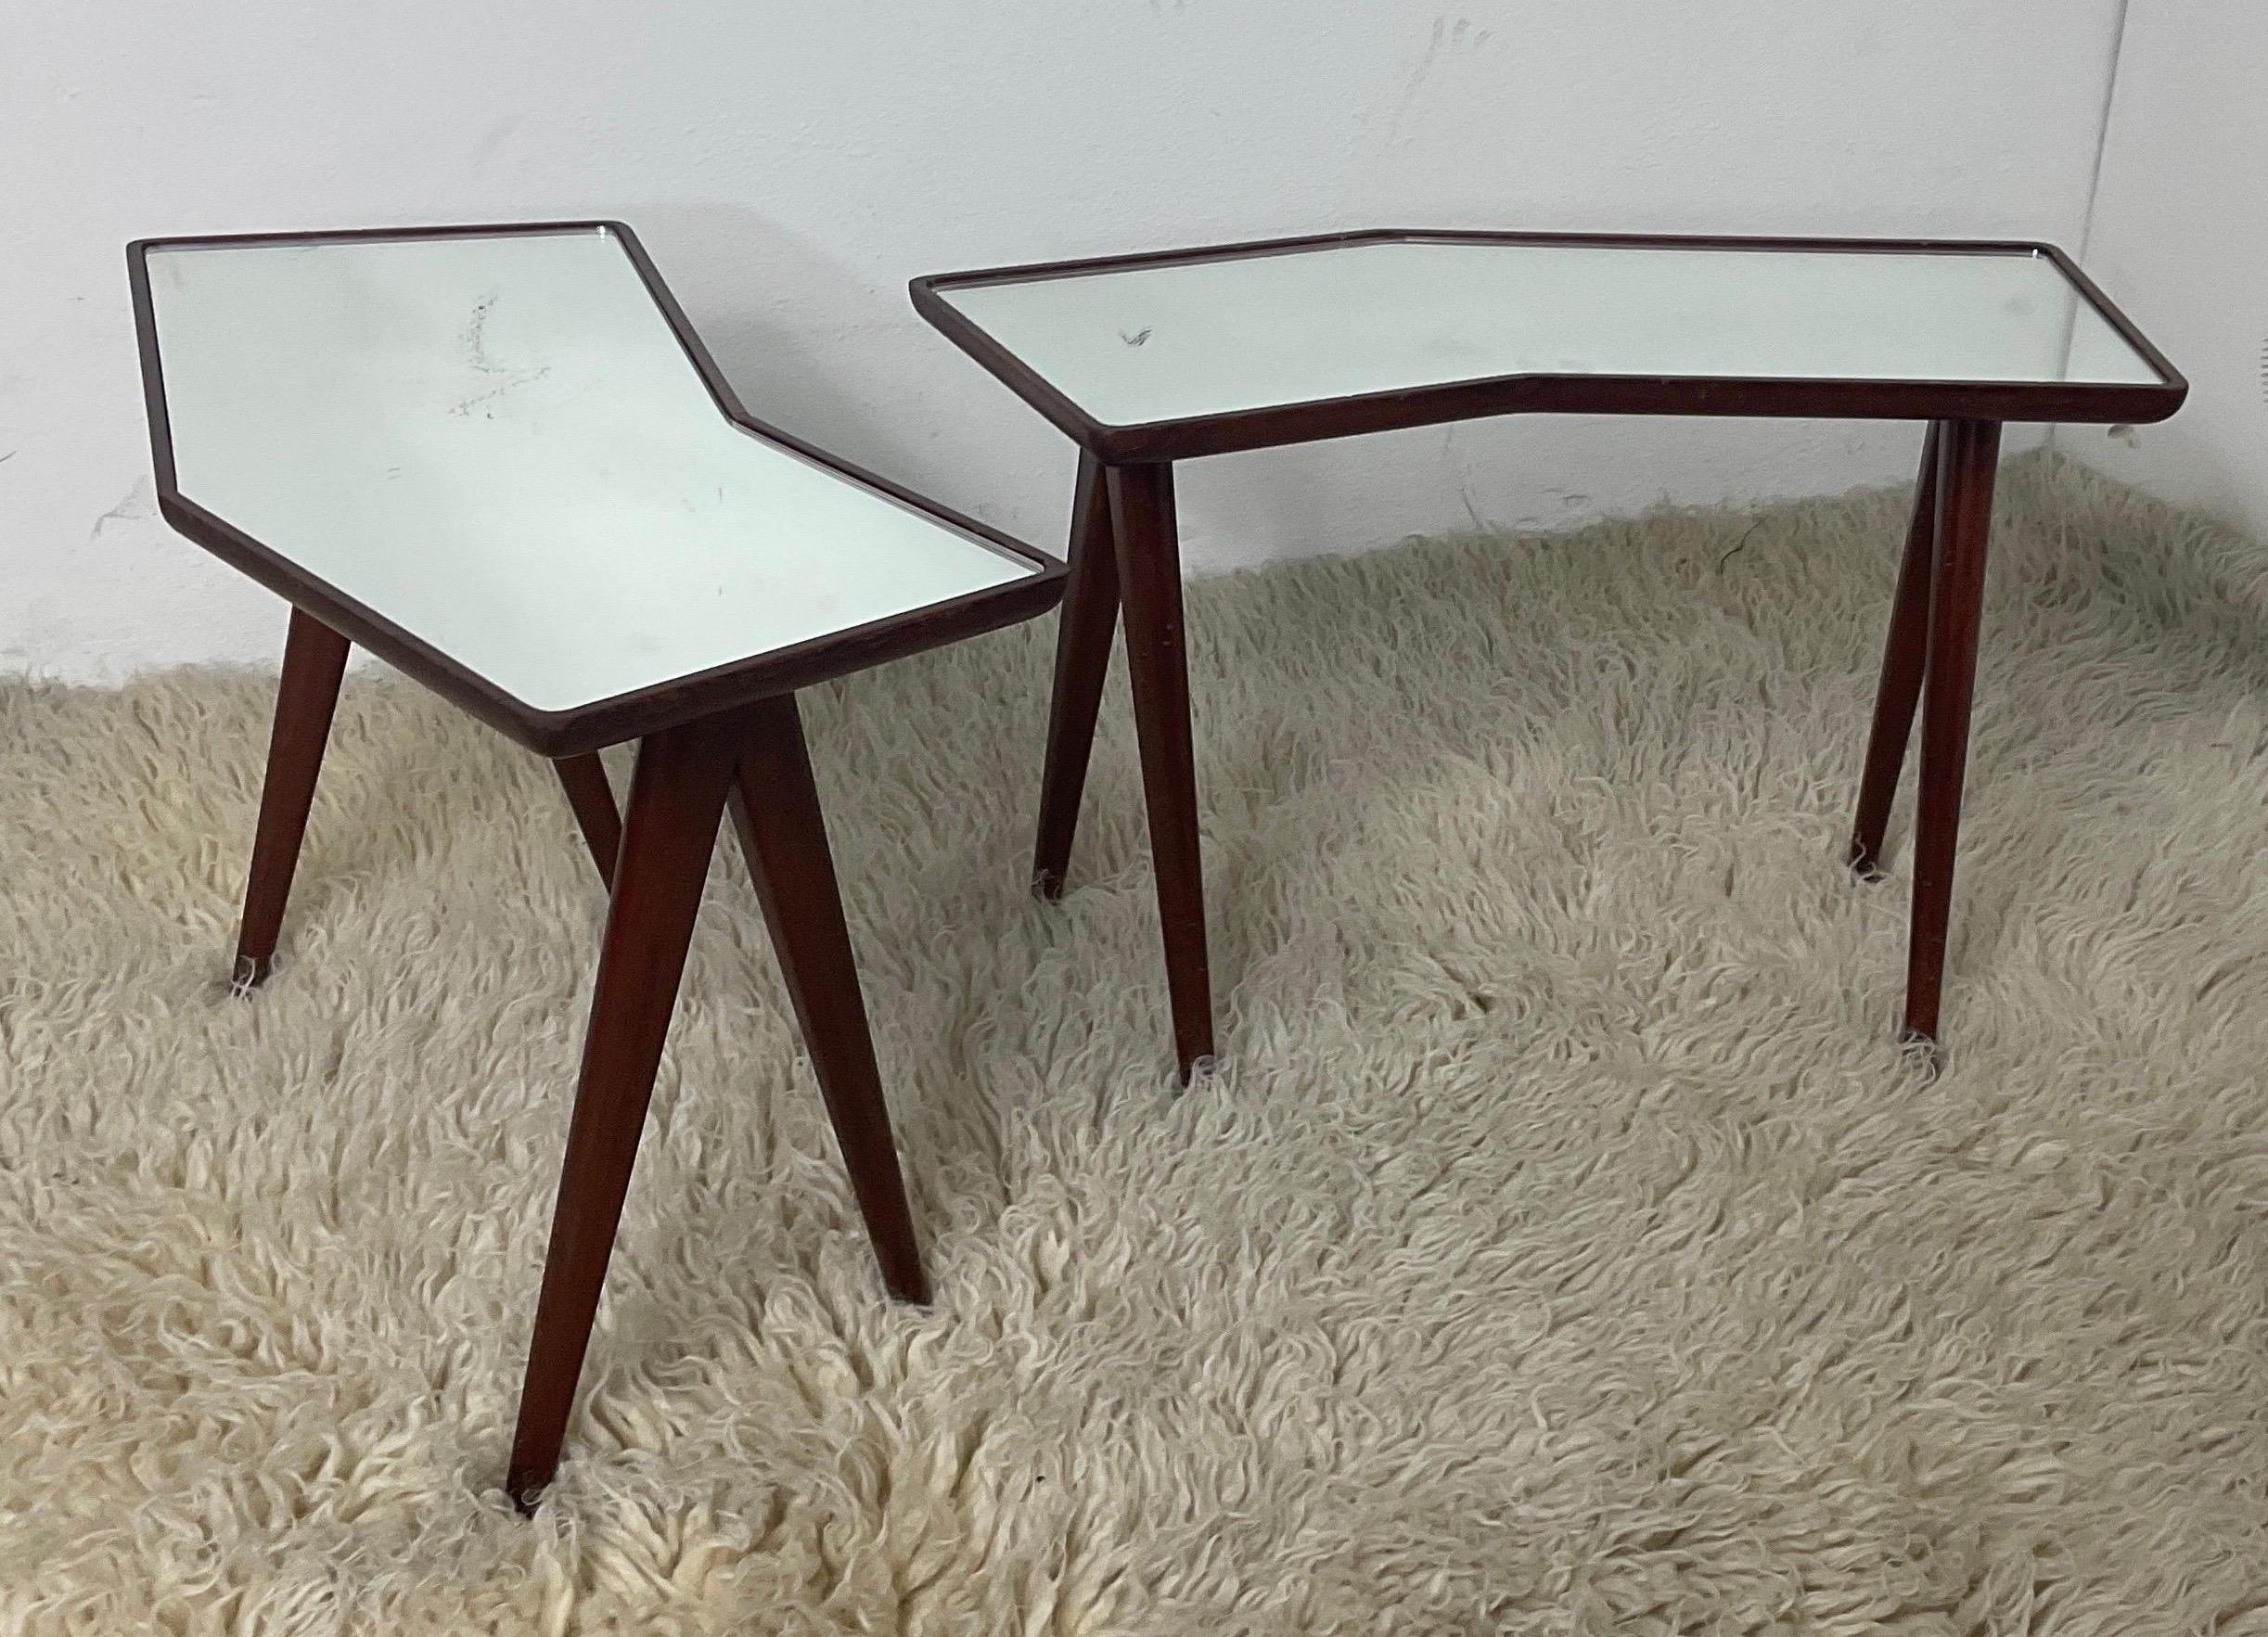 Mirror Pair of side tables by Gio Ponti for Fontana Arte, 1950s For Sale